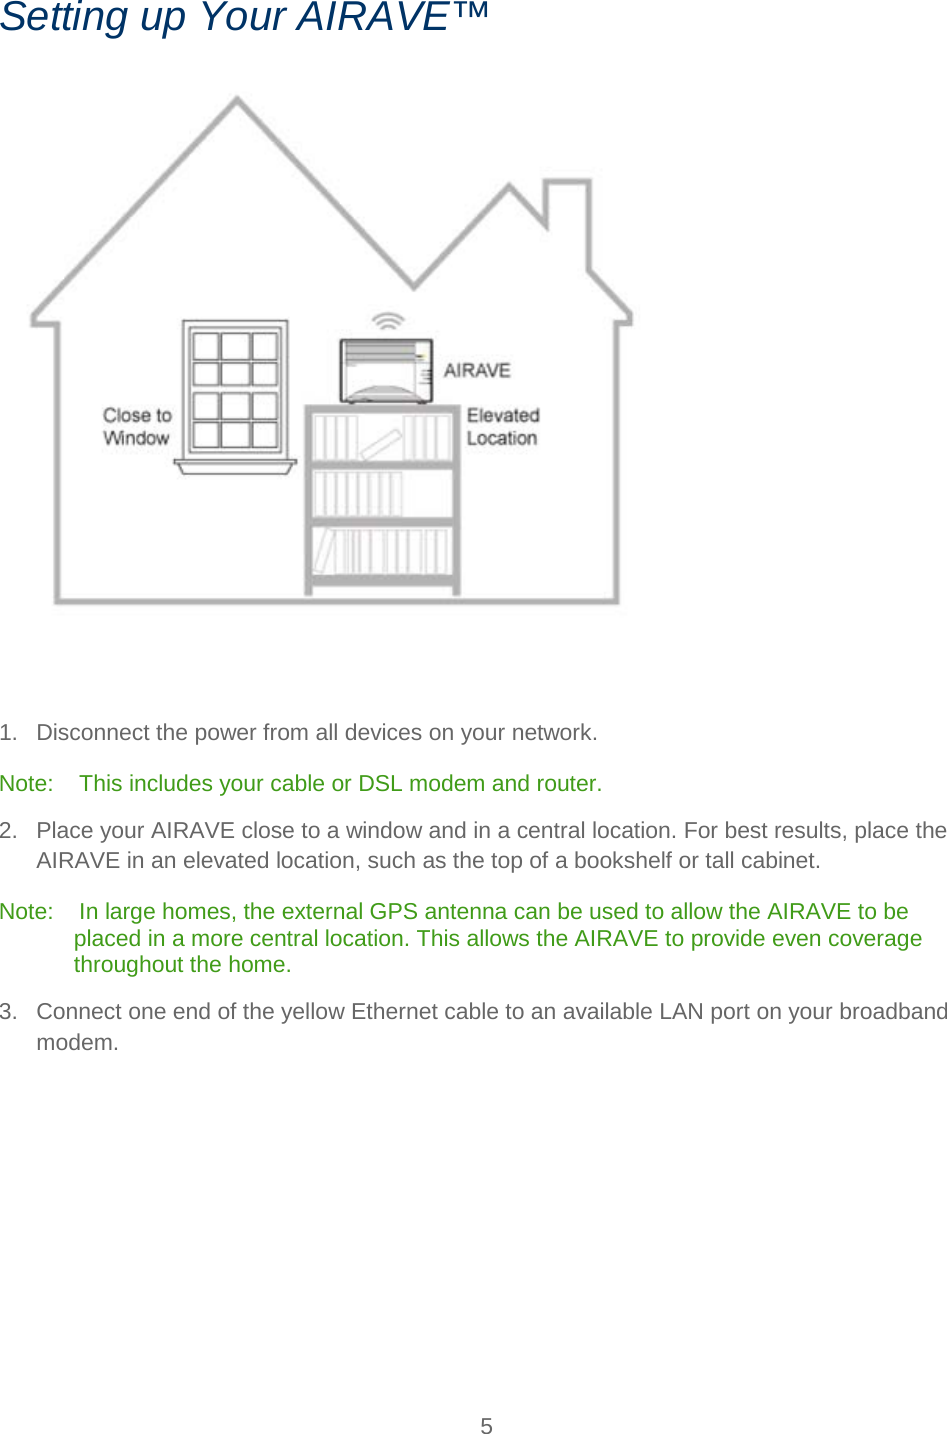    5   Setting up Your AIRAVE™    1. Disconnect the power from all devices on your network. Note:    This includes your cable or DSL modem and router. 2. Place your AIRAVE close to a window and in a central location. For best results, place the AIRAVE in an elevated location, such as the top of a bookshelf or tall cabinet. Note:    In large homes, the external GPS antenna can be used to allow the AIRAVE to be placed in a more central location. This allows the AIRAVE to provide even coverage throughout the home. 3. Connect one end of the yellow Ethernet cable to an available LAN port on your broadband modem. 